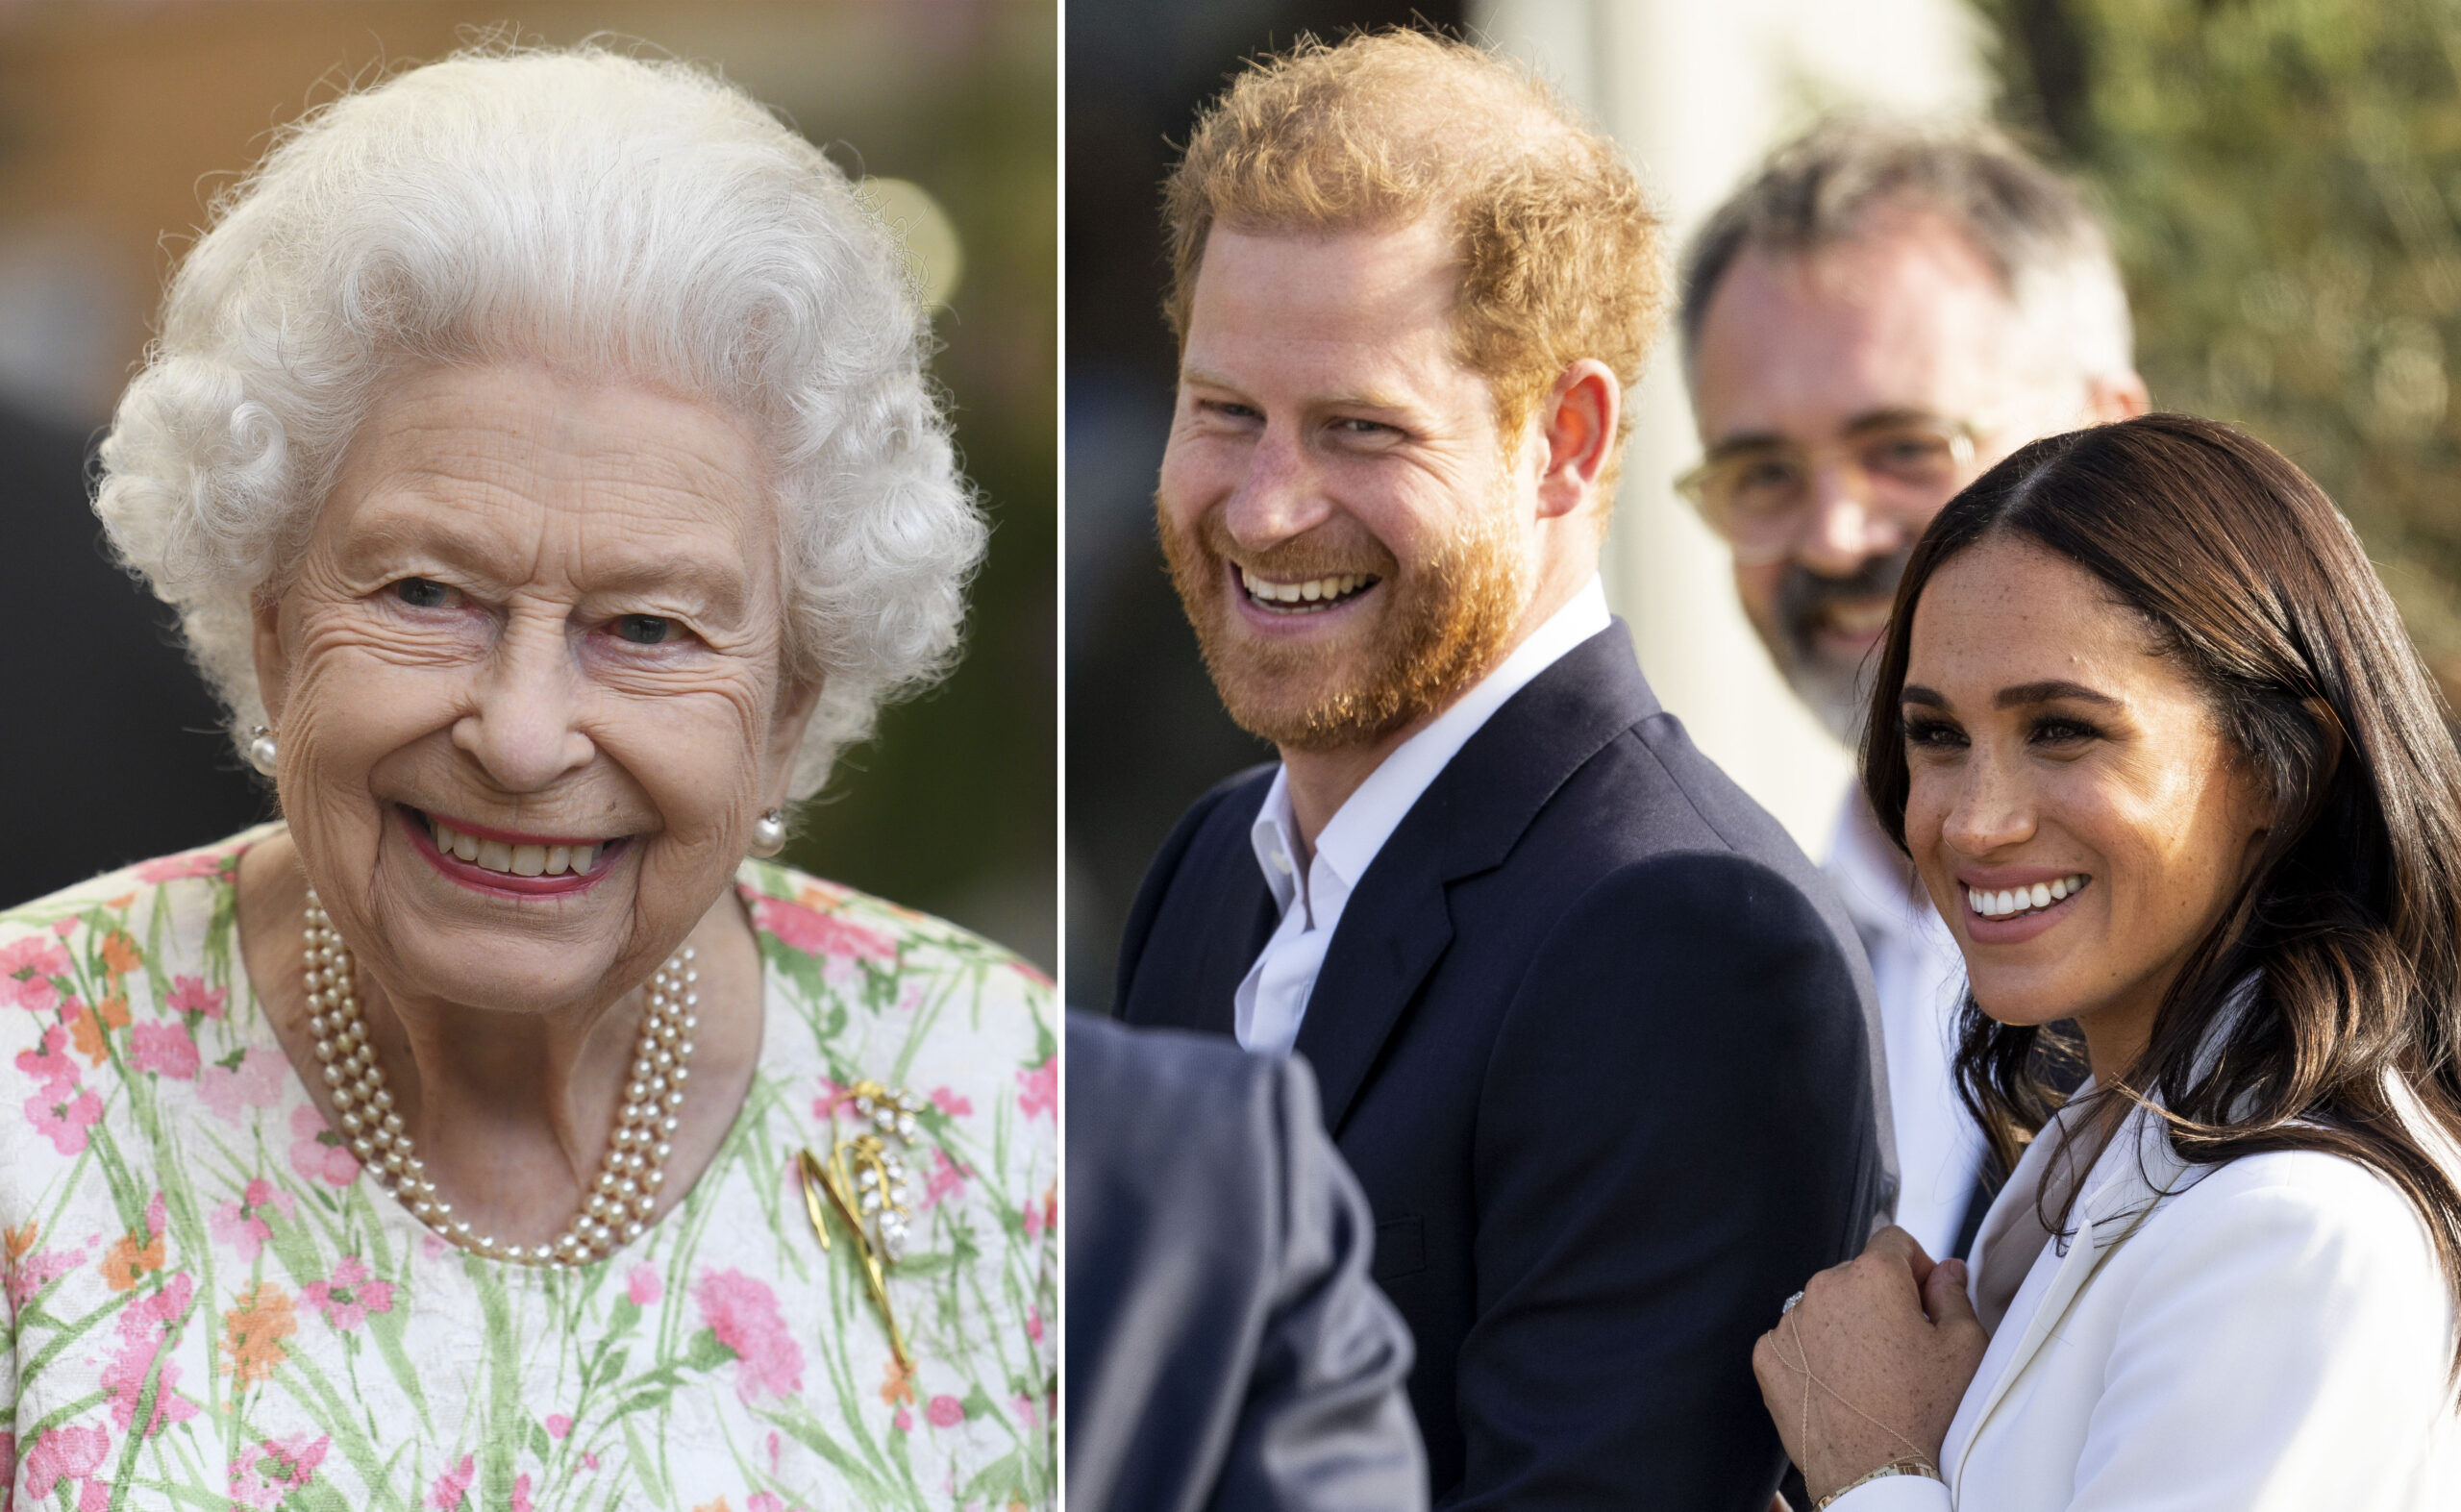 The Queen’s special invitation to Prince Harry and Meghan, Duchess of Sussex revealed